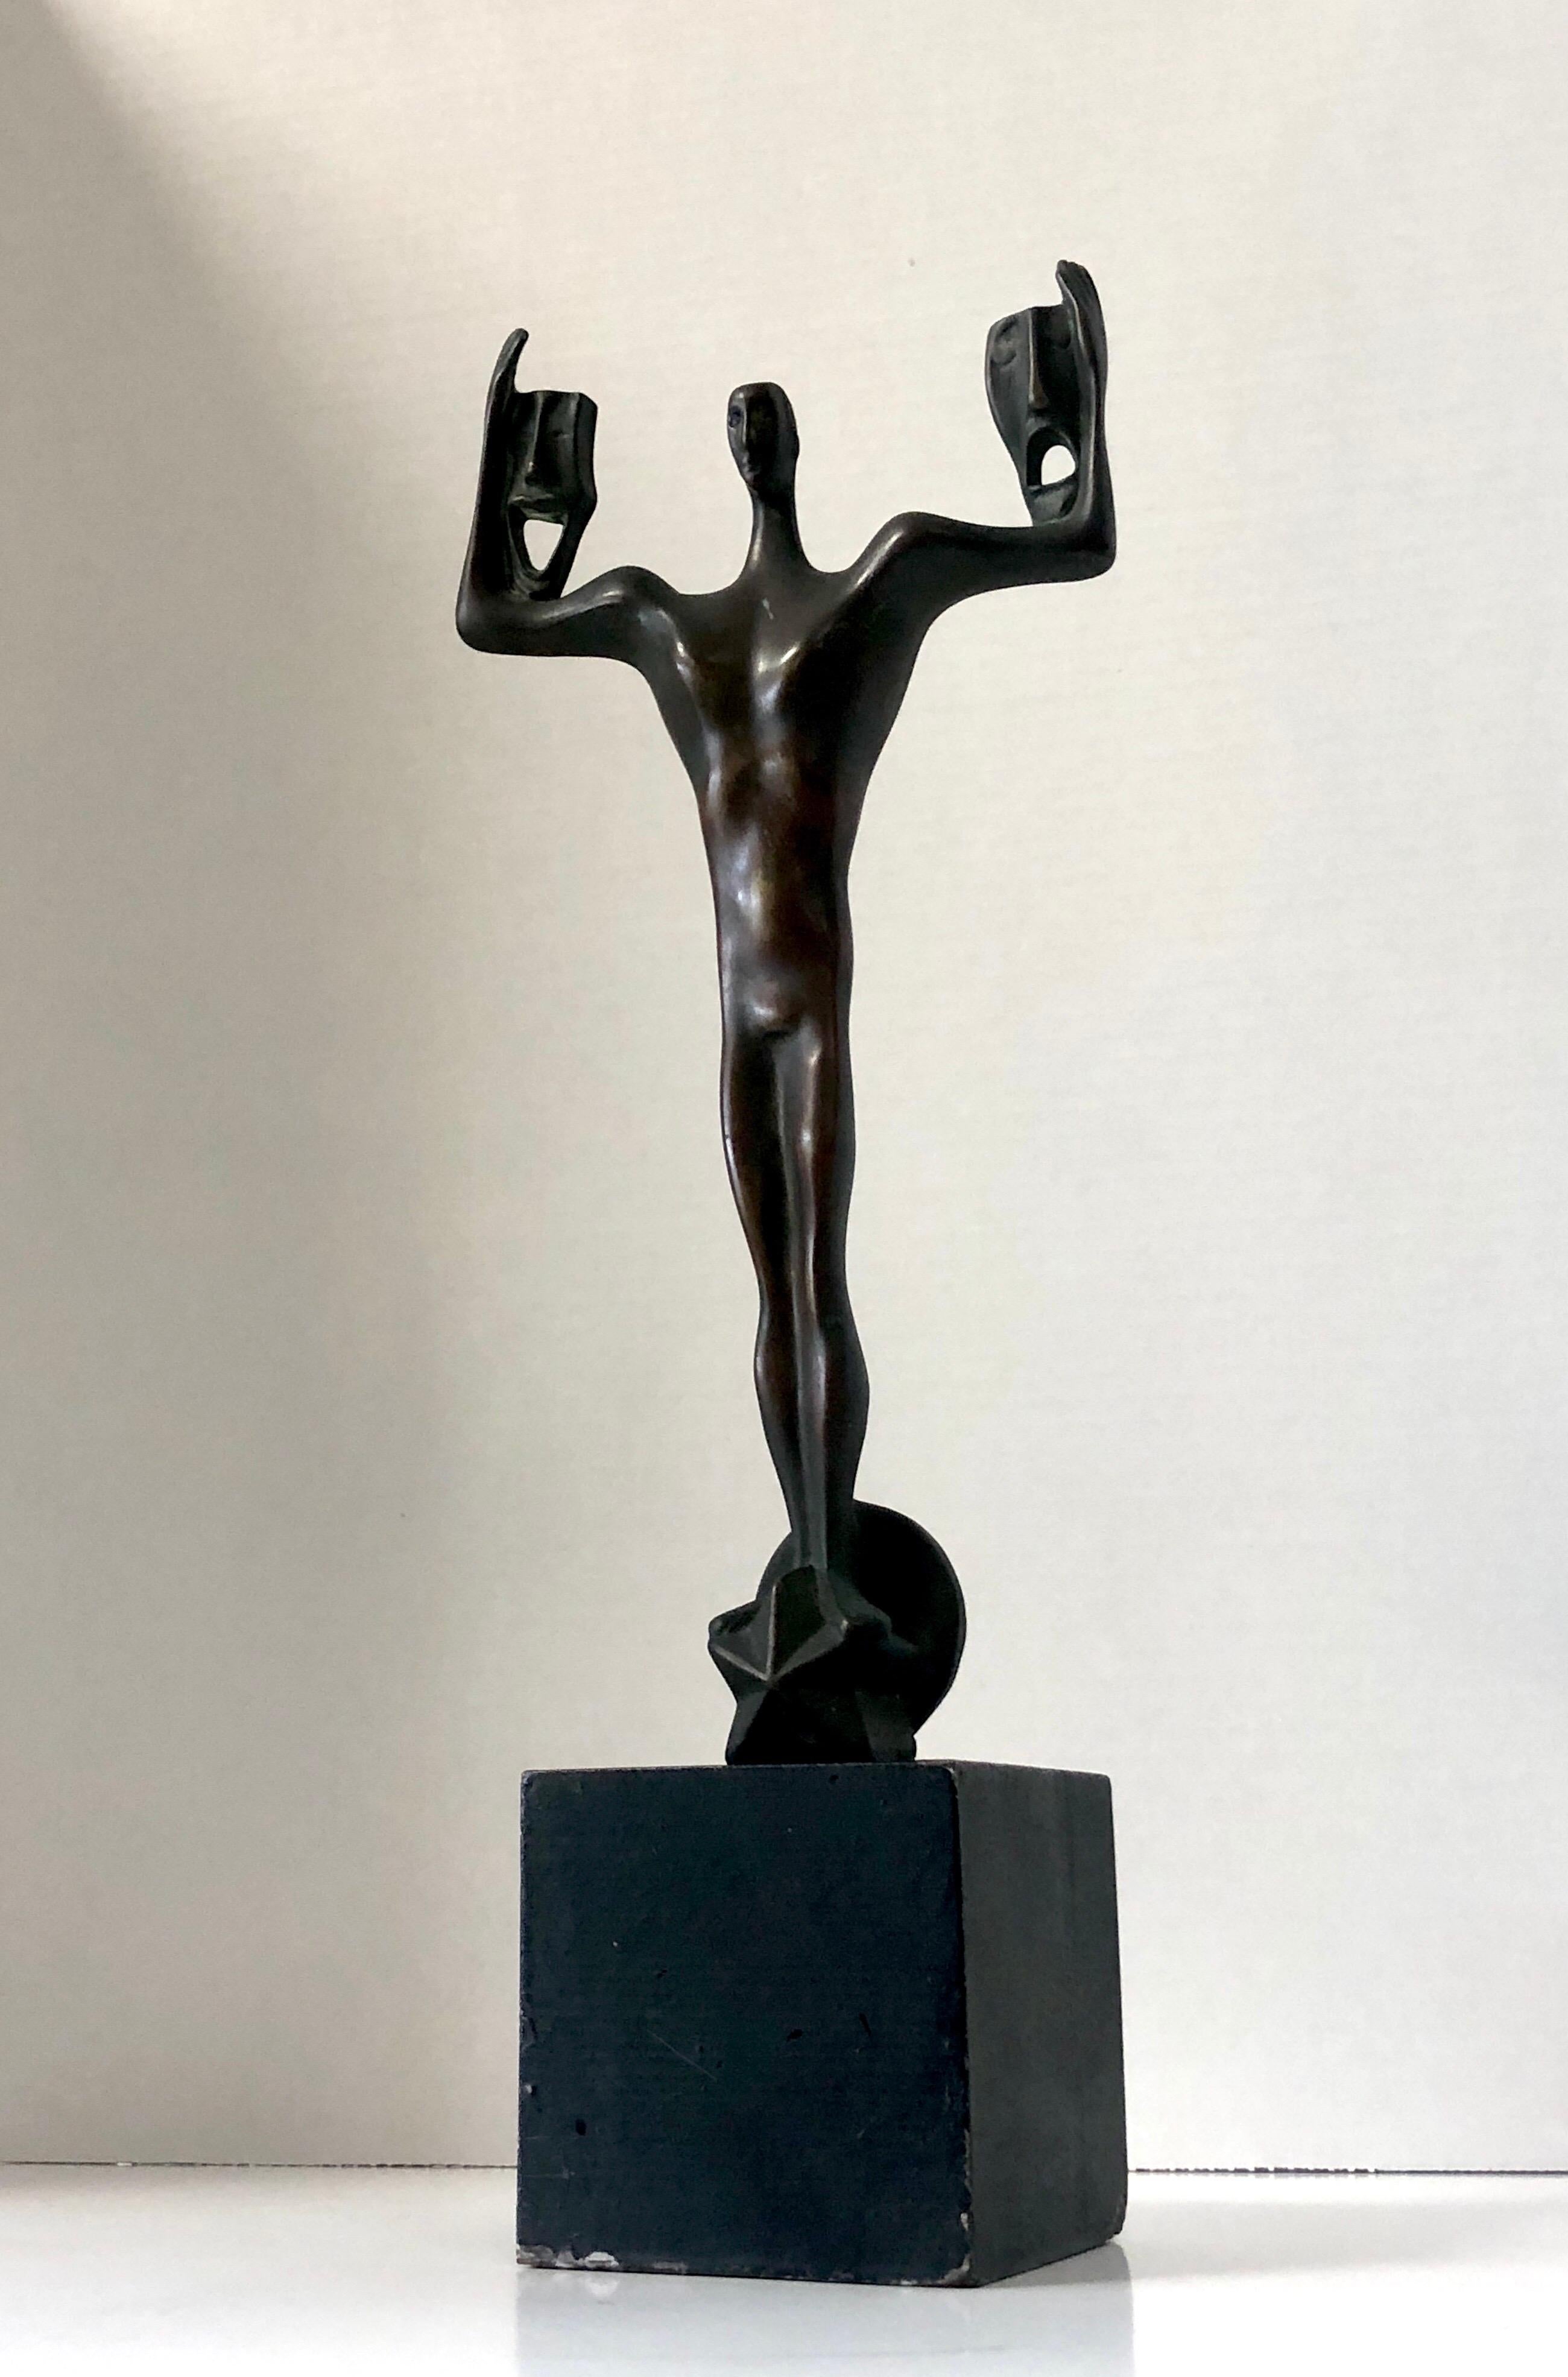 A midcentury bronze sculpture. Believed to be an acting award. An abstract stylized man holding drama and comedy masks while standing on a star. Wood block base. Signed ineligibly.